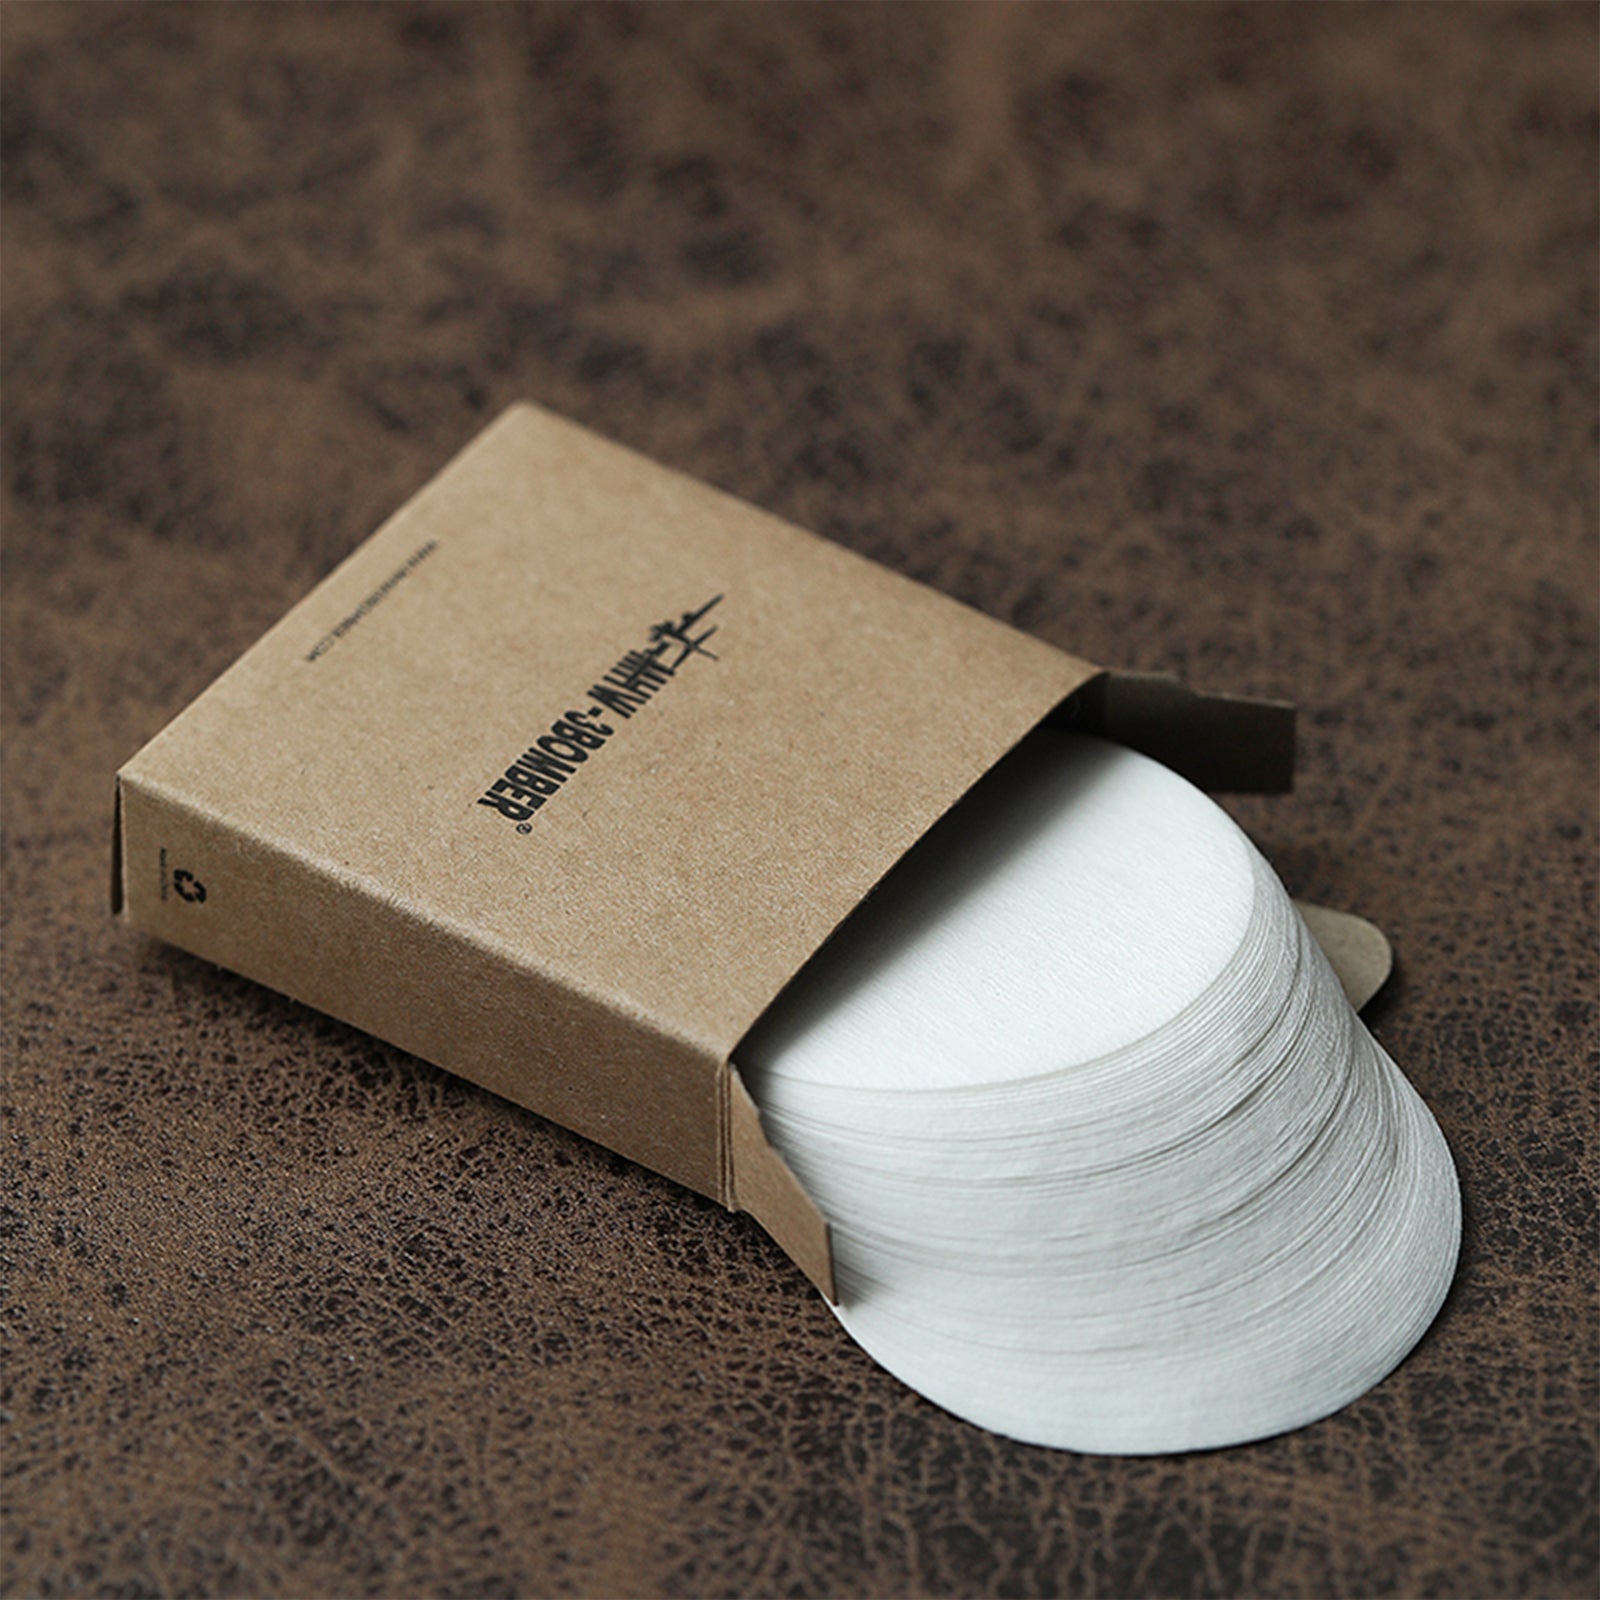 MHW-3BOMBER Disposable Coffee Filter Paper